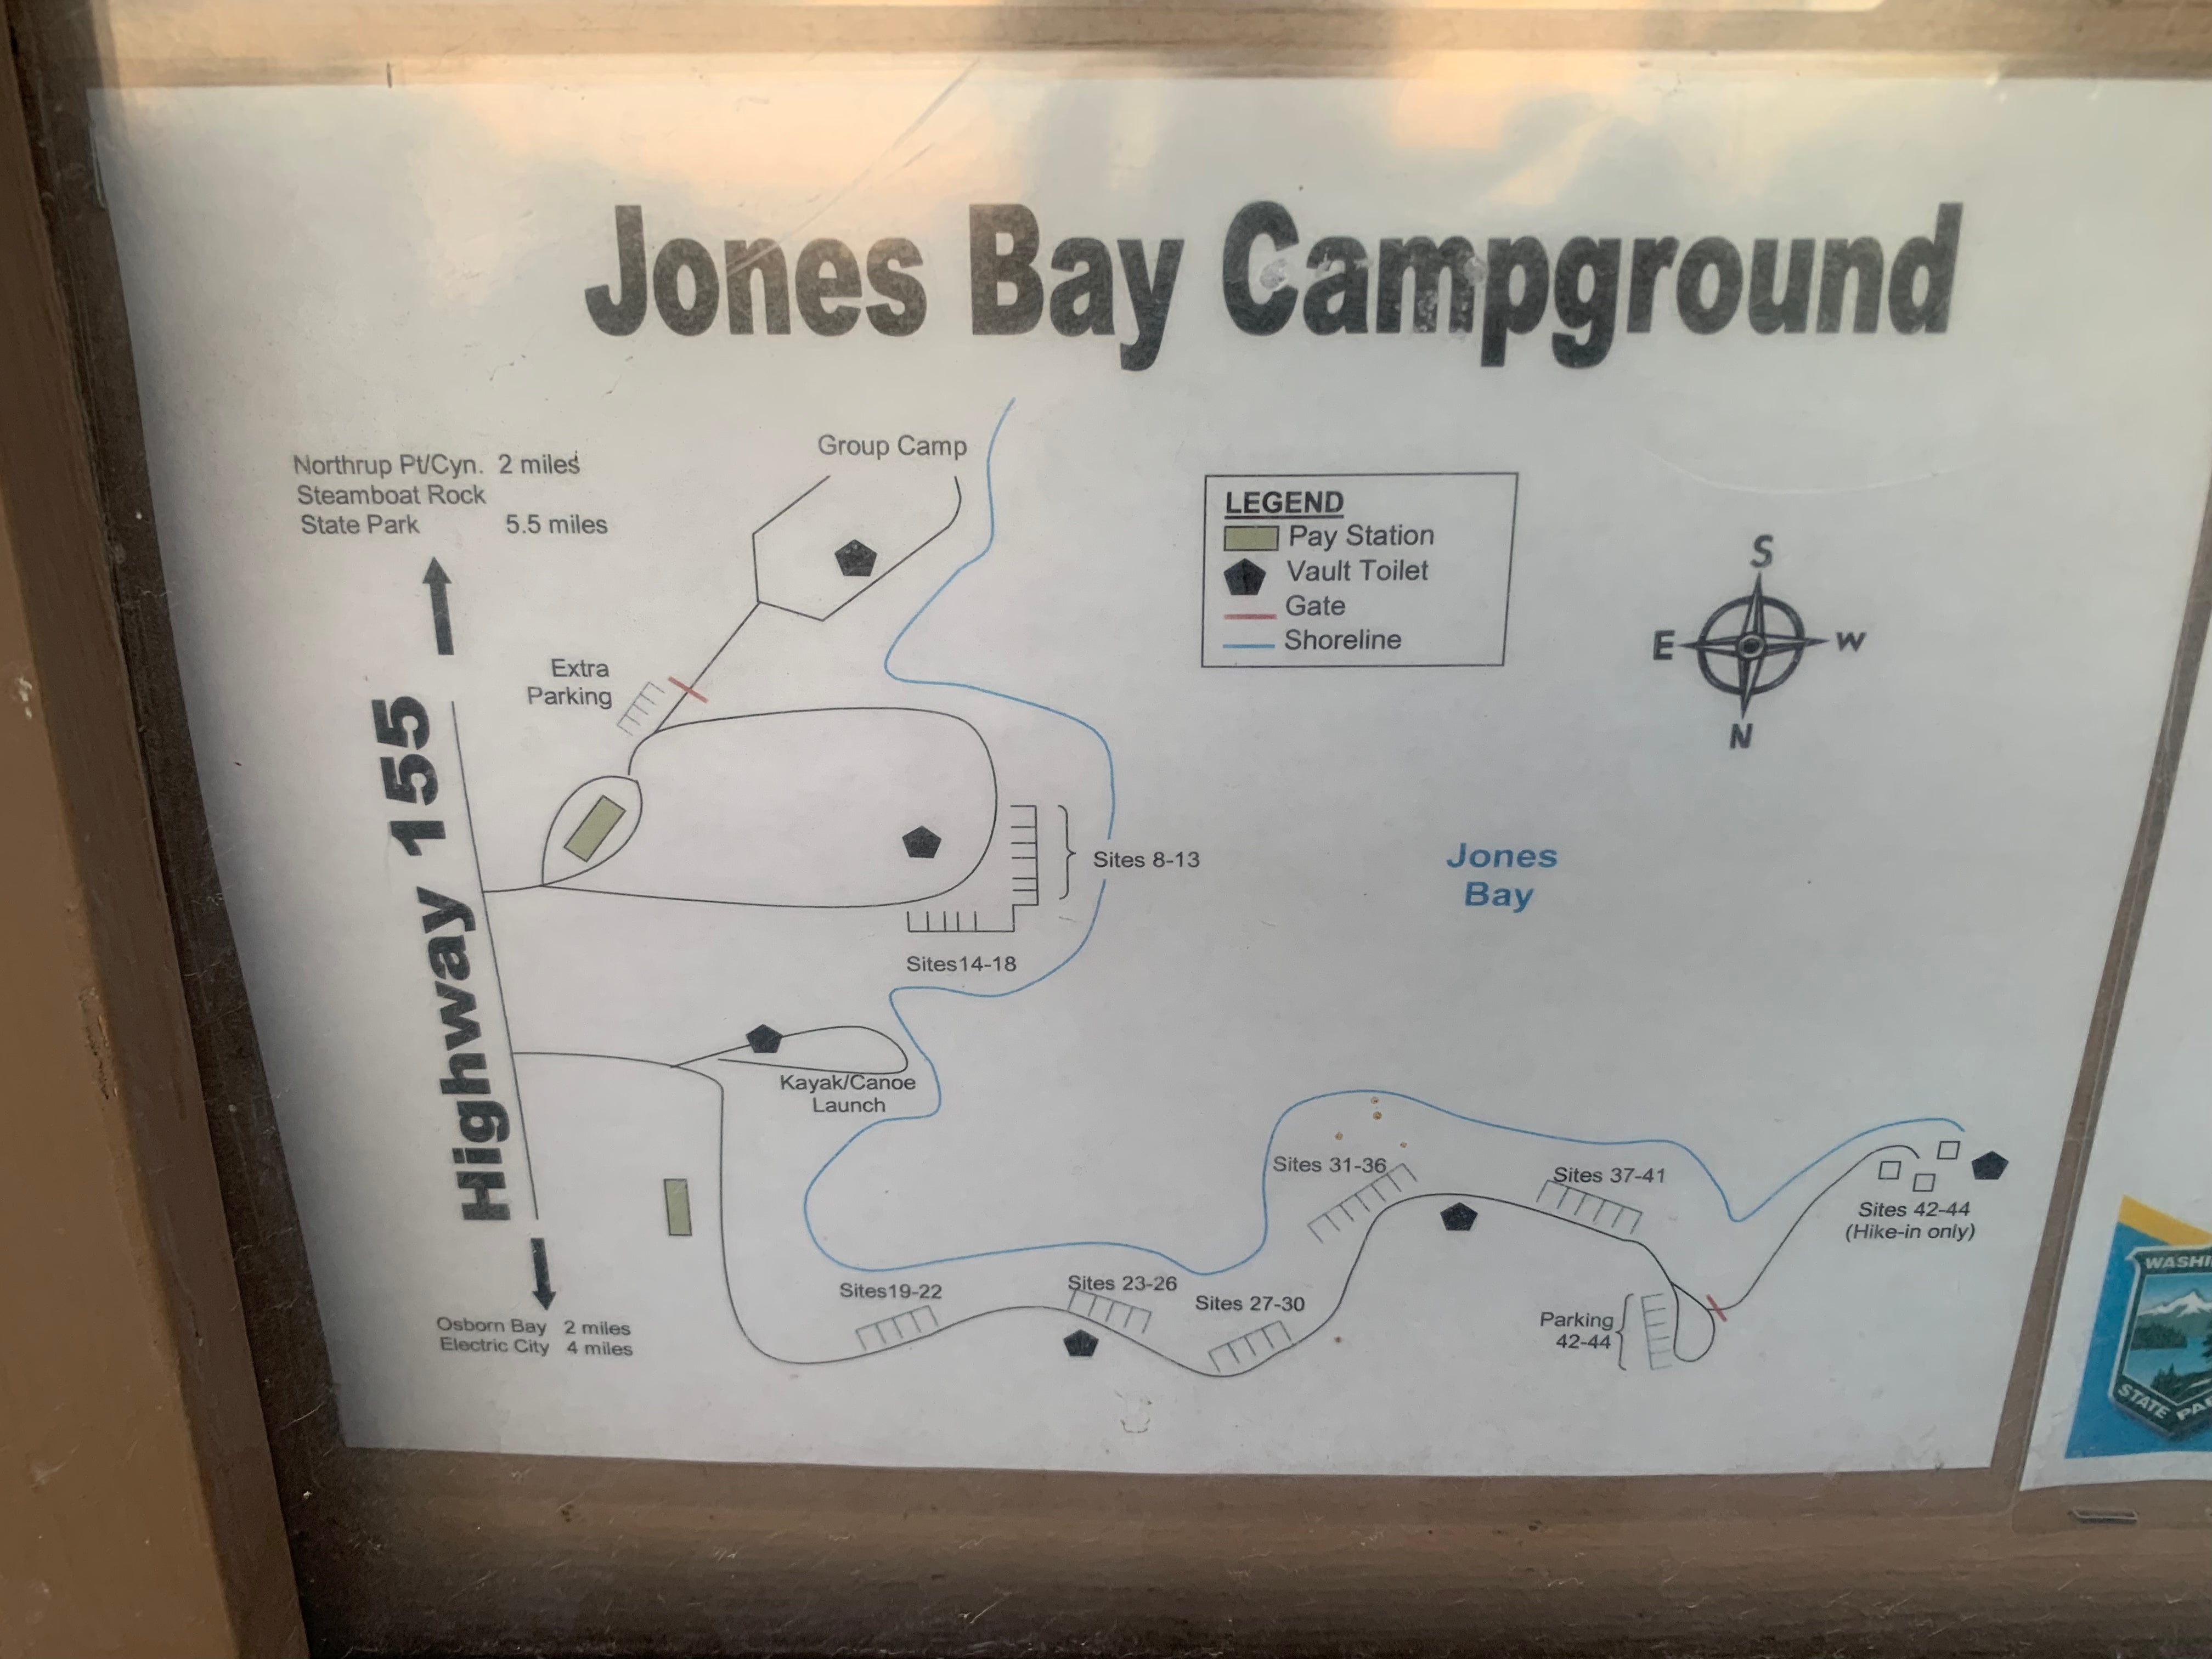 Camper submitted image from Jones Bay Campground — Steamboat Rock State Park - 3